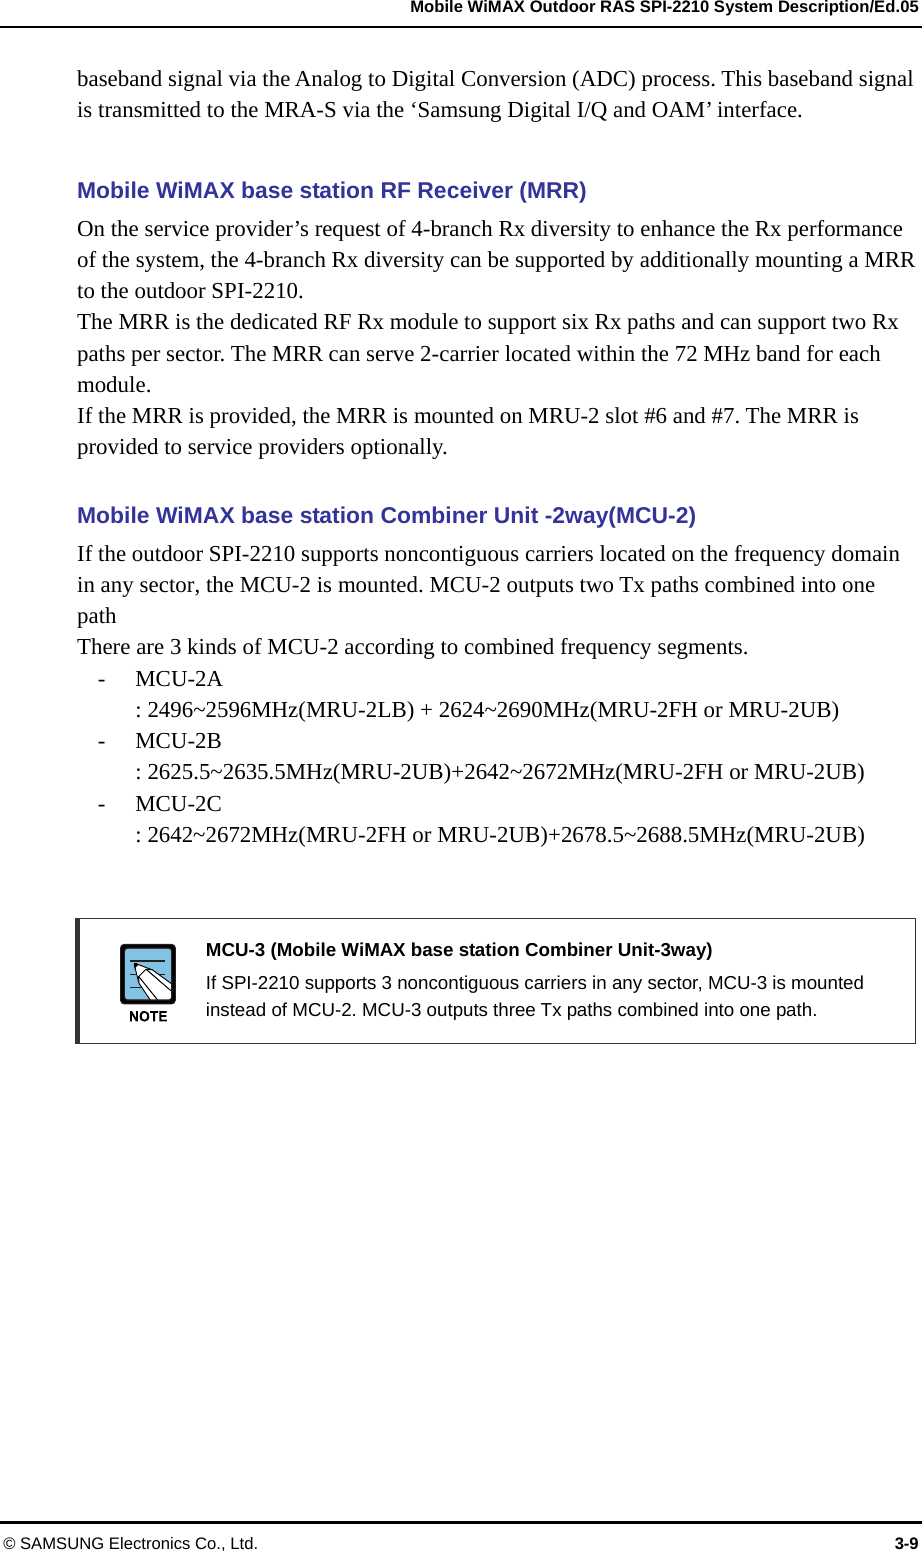   Mobile WiMAX Outdoor RAS SPI-2210 System Description/Ed.05 © SAMSUNG Electronics Co., Ltd.  3-9 baseband signal via the Analog to Digital Conversion (ADC) process. This baseband signal is transmitted to the MRA-S via the ‘Samsung Digital I/Q and OAM’ interface.  Mobile WiMAX base station RF Receiver (MRR) On the service provider’s request of 4-branch Rx diversity to enhance the Rx performance of the system, the 4-branch Rx diversity can be supported by additionally mounting a MRR to the outdoor SPI-2210. The MRR is the dedicated RF Rx module to support six Rx paths and can support two Rx paths per sector. The MRR can serve 2-carrier located within the 72 MHz band for each module. If the MRR is provided, the MRR is mounted on MRU-2 slot #6 and #7. The MRR is provided to service providers optionally.    Mobile WiMAX base station Combiner Unit -2way(MCU-2) If the outdoor SPI-2210 supports noncontiguous carriers located on the frequency domain in any sector, the MCU-2 is mounted. MCU-2 outputs two Tx paths combined into one path  There are 3 kinds of MCU-2 according to combined frequency segments. - MCU-2A  : 2496~2596MHz(MRU-2LB) + 2624~2690MHz(MRU-2FH or MRU-2UB) - MCU-2B : 2625.5~2635.5MHz(MRU-2UB)+2642~2672MHz(MRU-2FH or MRU-2UB) - MCU-2C  : 2642~2672MHz(MRU-2FH or MRU-2UB)+2678.5~2688.5MHz(MRU-2UB)     MCU-3 (Mobile WiMAX base station Combiner Unit-3way)   If SPI-2210 supports 3 noncontiguous carriers in any sector, MCU-3 is mounted instead of MCU-2. MCU-3 outputs three Tx paths combined into one path.  